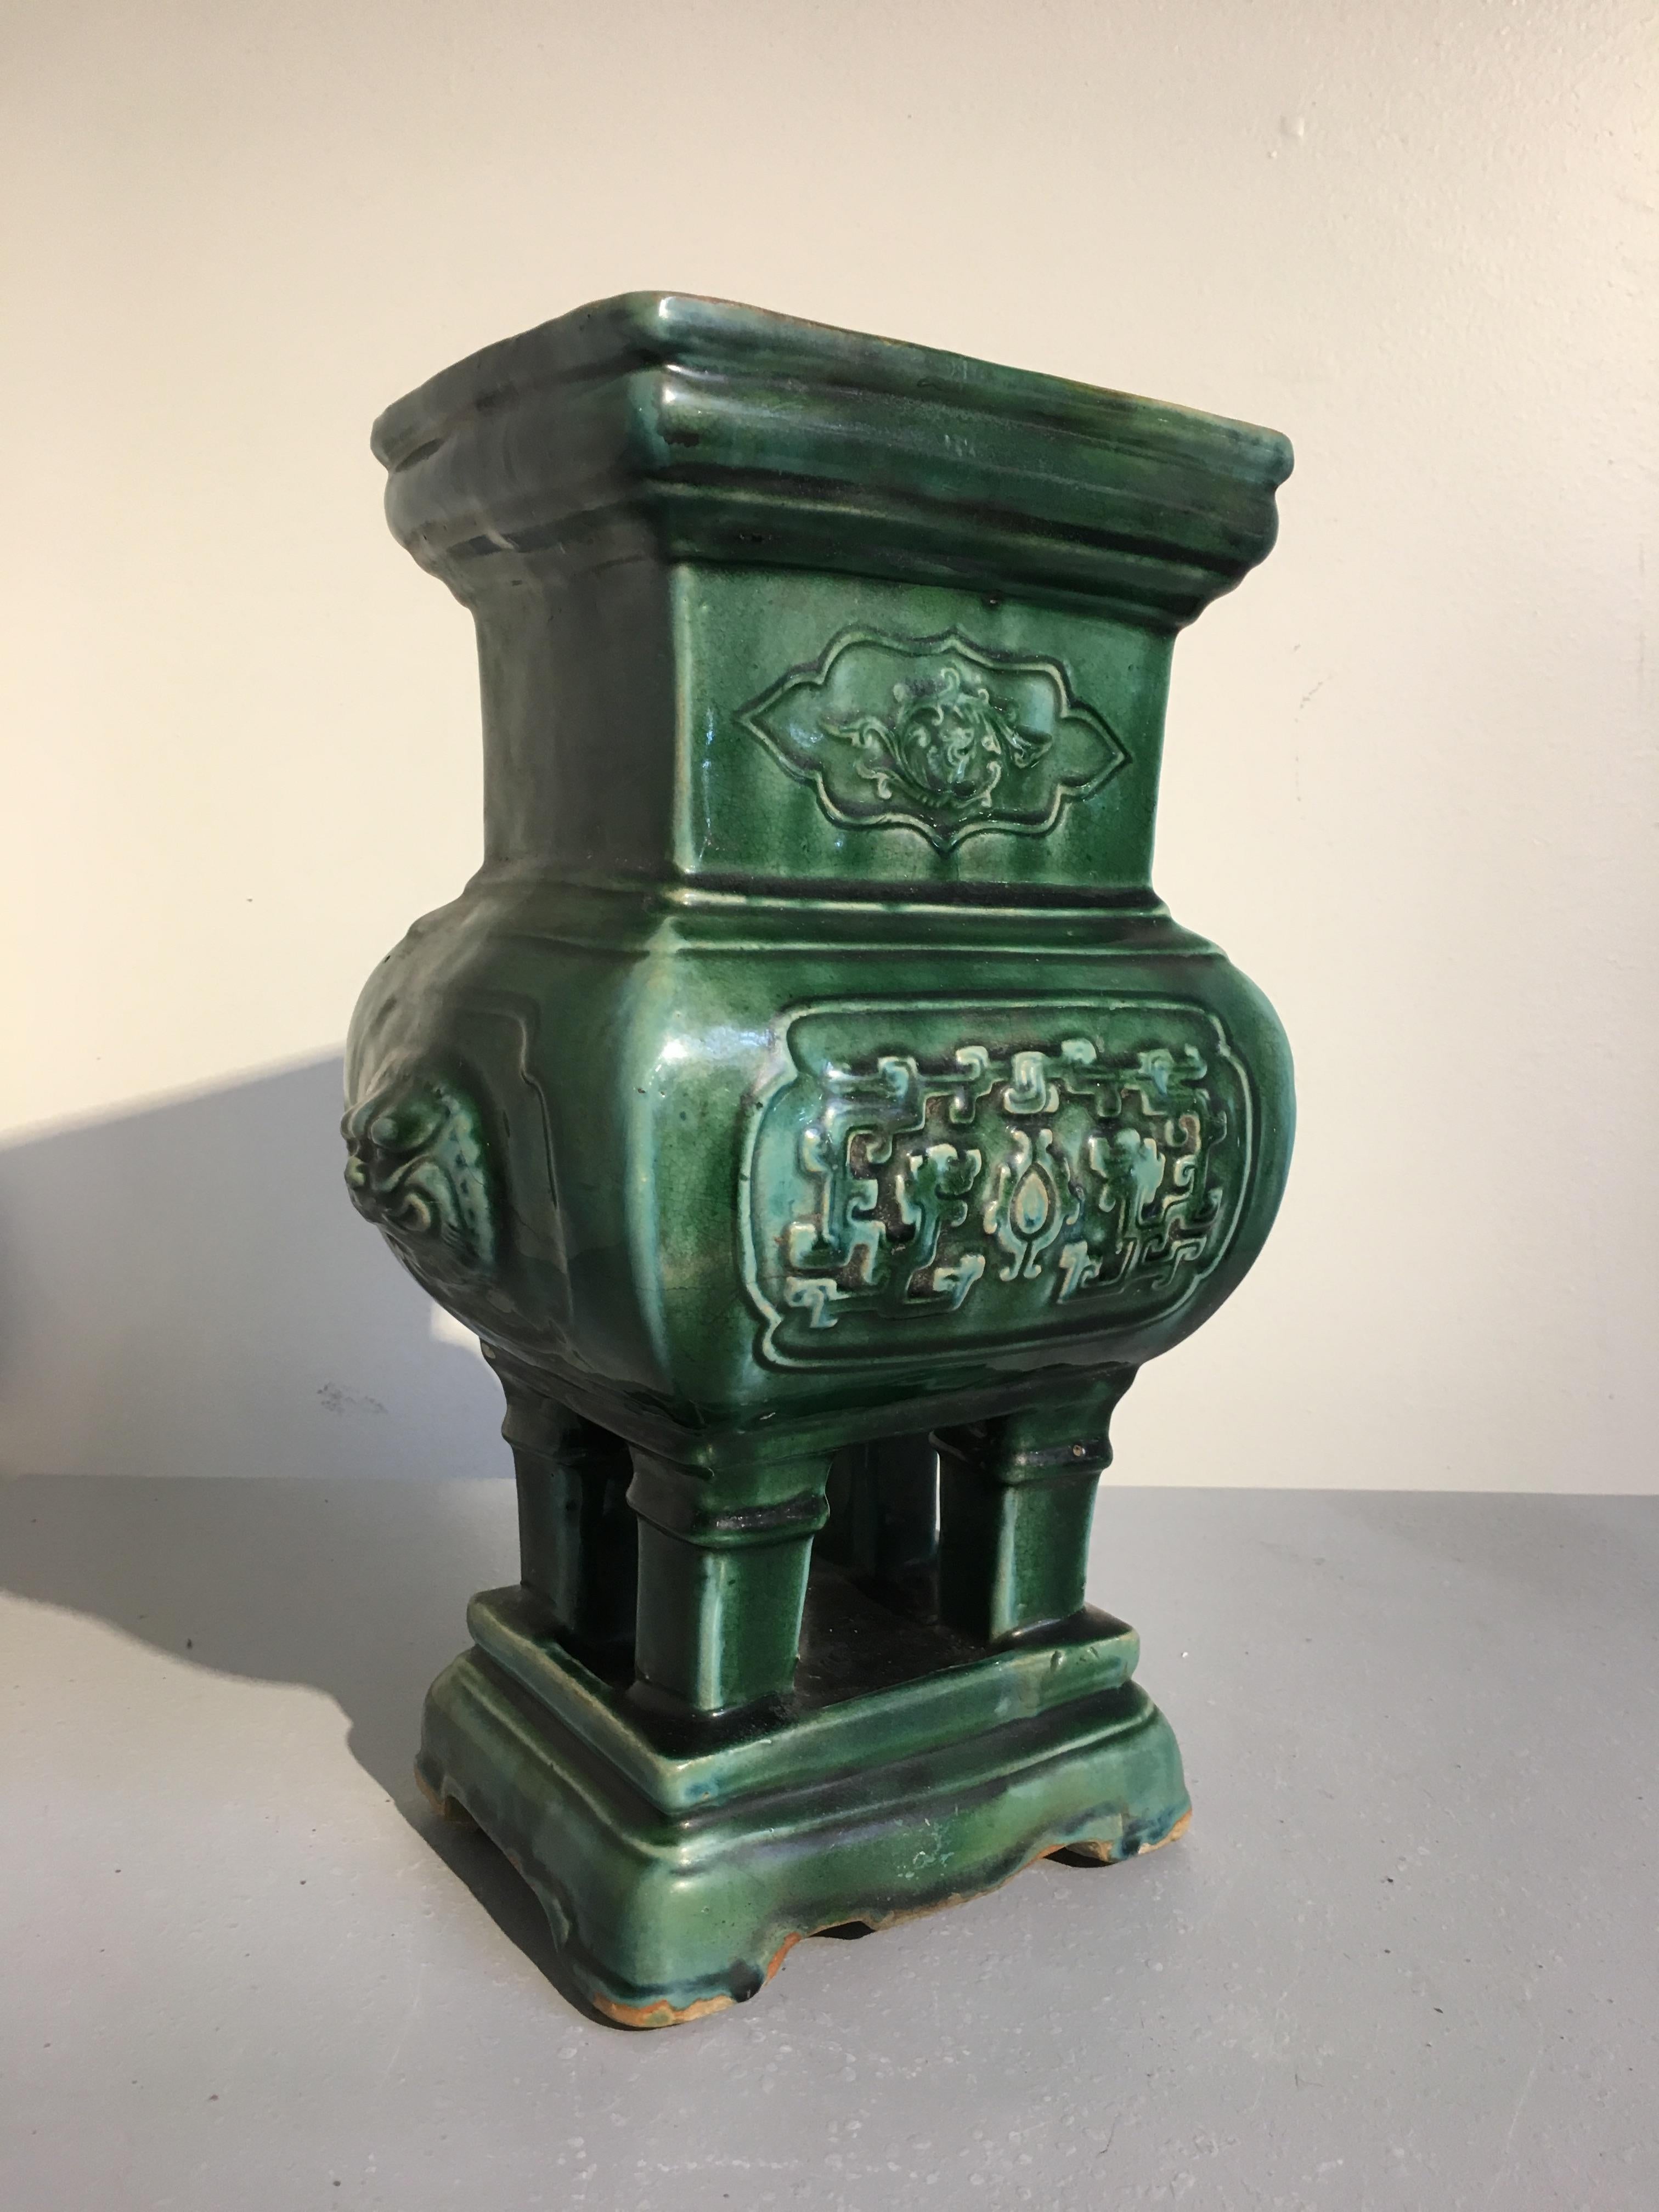 A charming Chinese green glazed pottery censer or incense burner, Qing Dynasty, late 19th century. Now suitable for use as a jardiniere or vase.
The incense burner in glazed a deep green, in imitation of bronze models, and set on four tapered legs